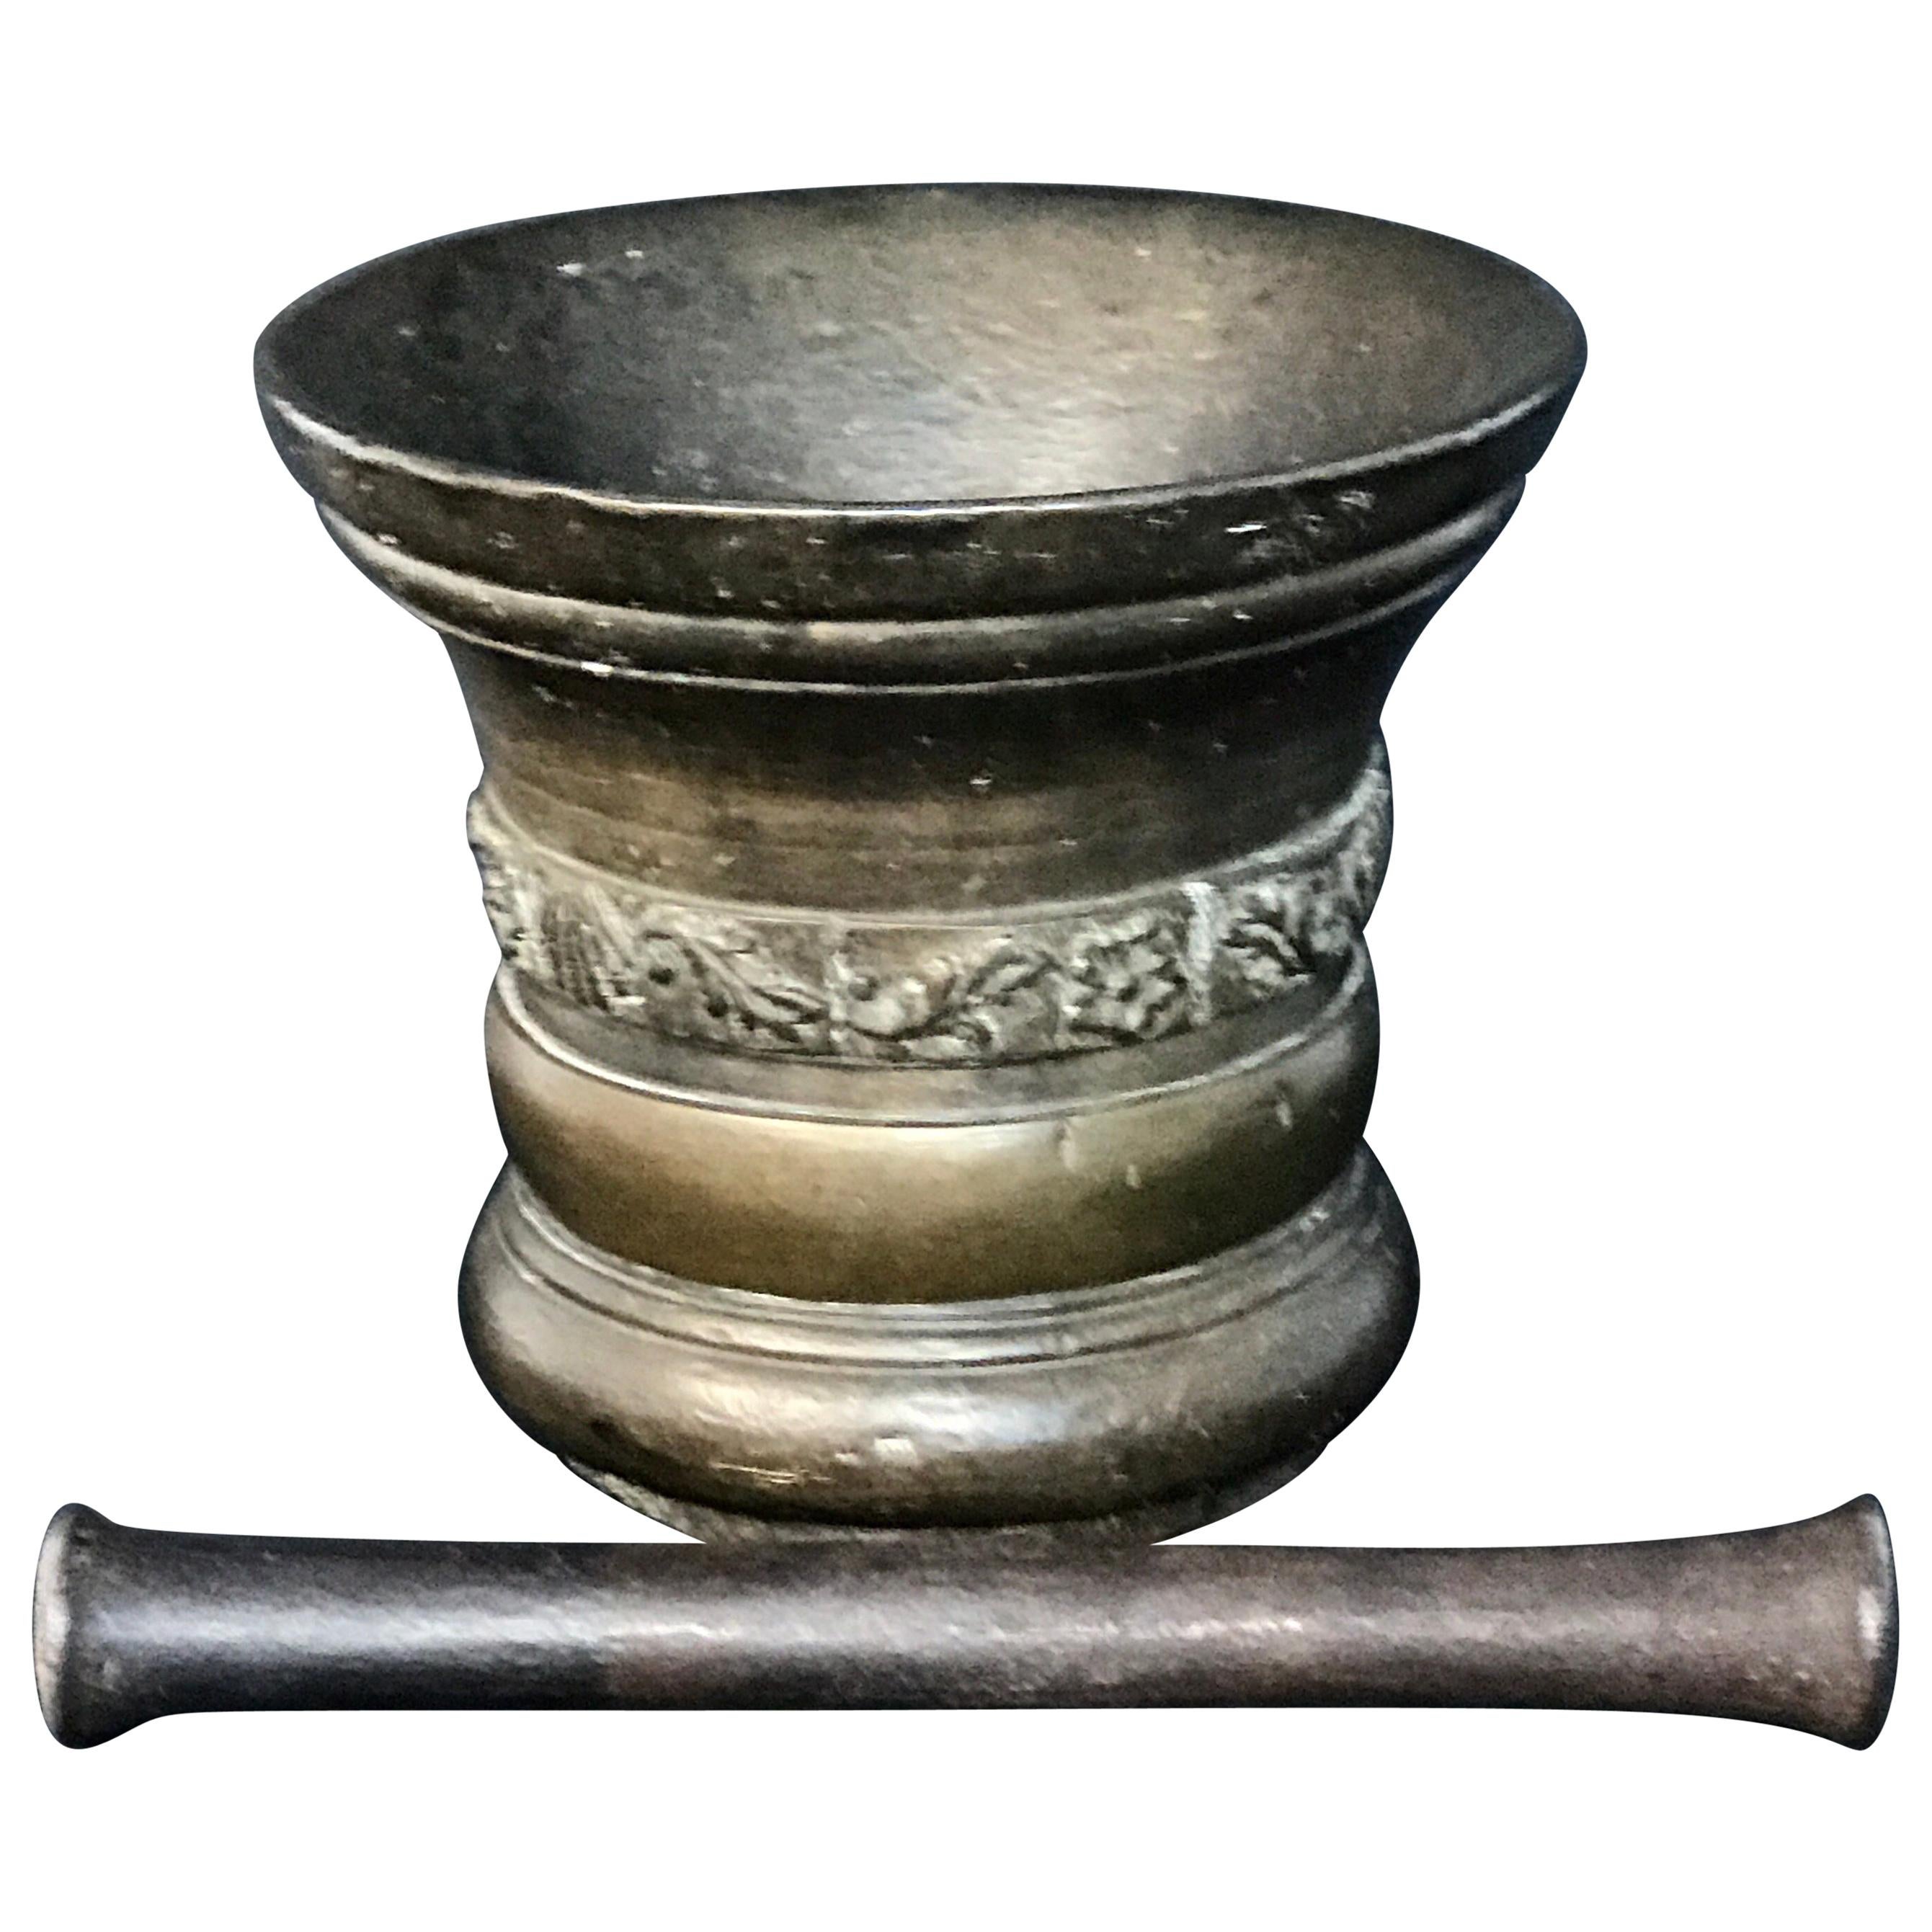 Substantial Antique Italian Bronze Mortar and Pestle For Sale